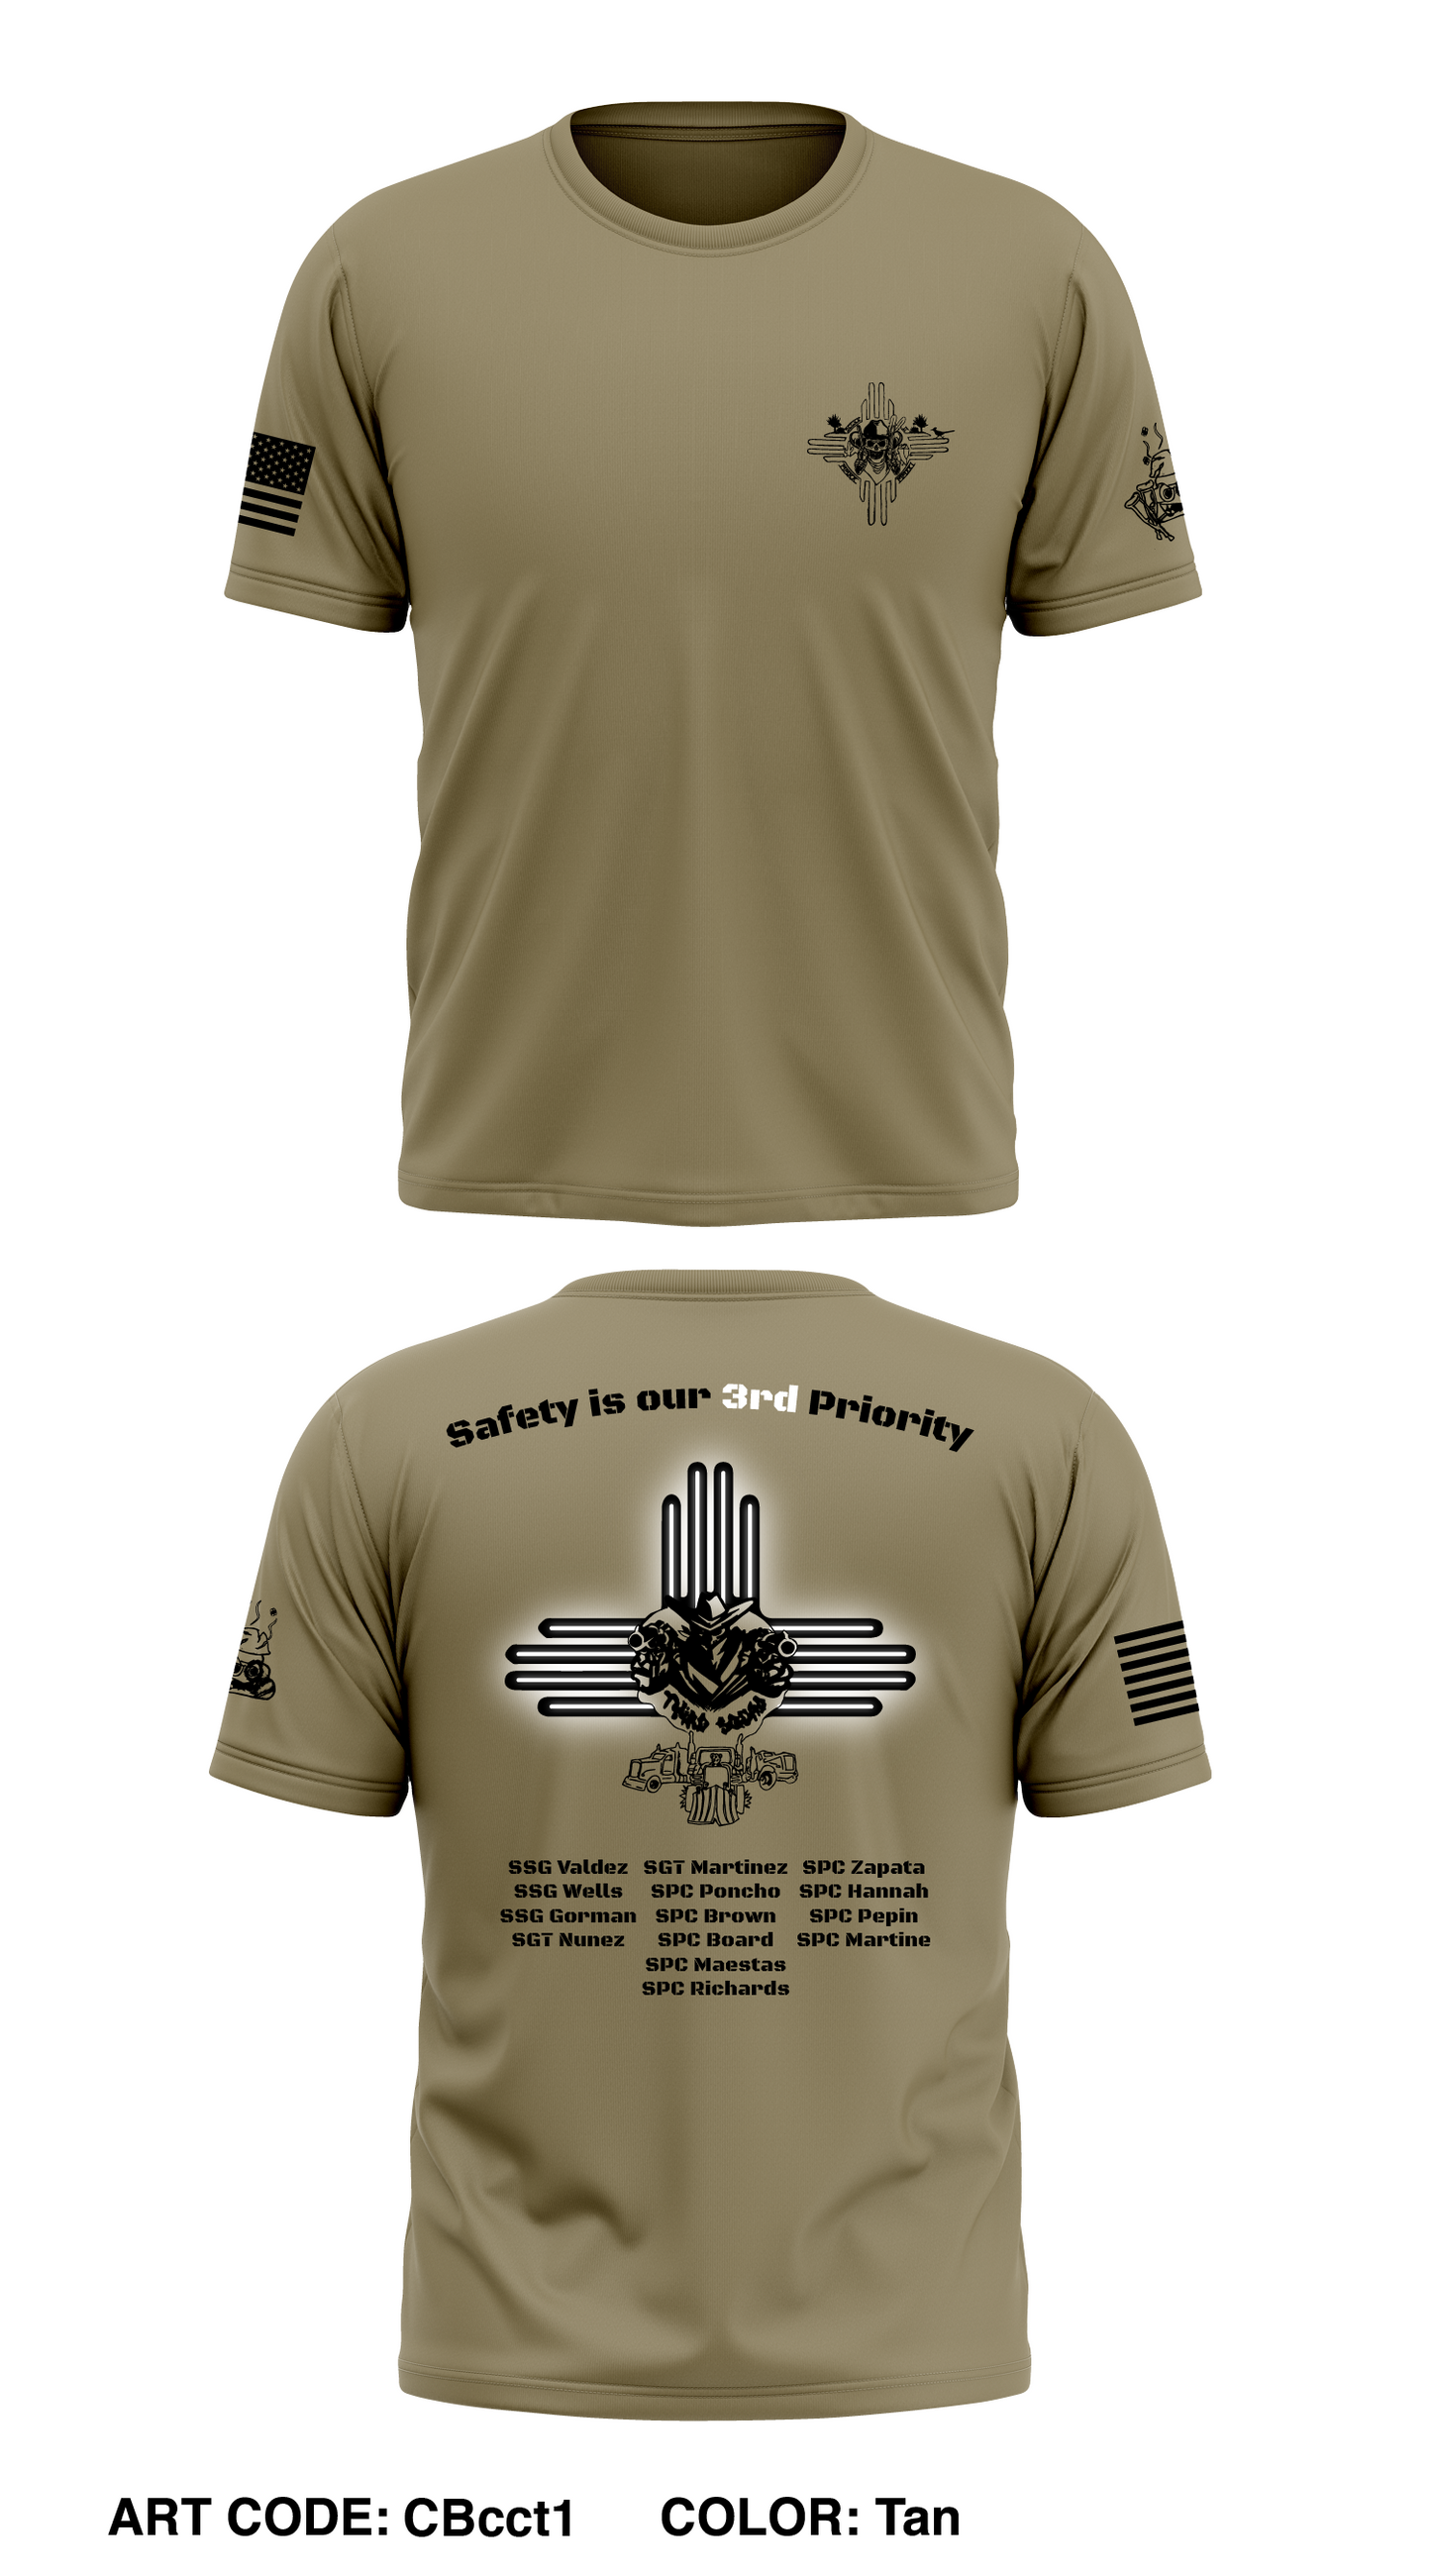 720th TC 2nd Platoon 3rd Squad Store 1 Core Men's SS Performance Tee - CBcct1